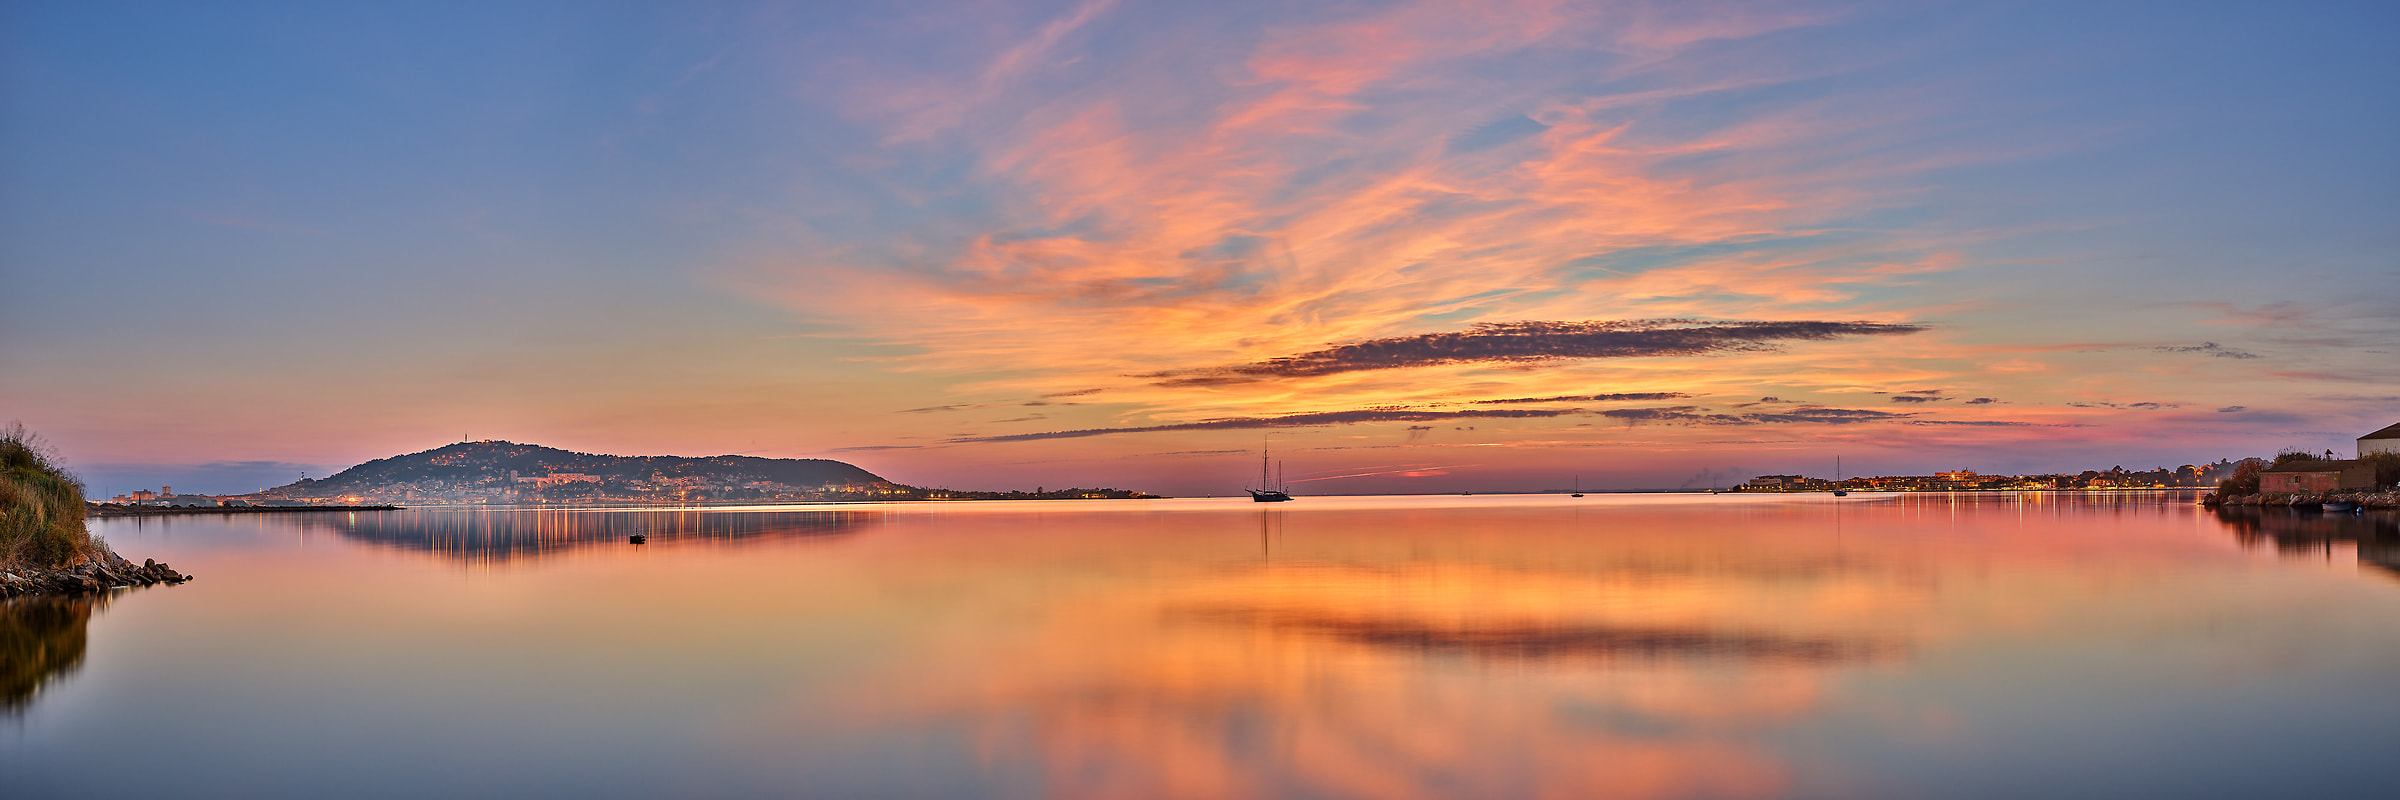 323 megapixels! A very high resolution, large-format VAST photo print of sunset reflecting in the water with a sailboat; landscape photograph created by David Meaux in l'Étang de Thau, Balaruc-les-Bains, l'Hérault, France.